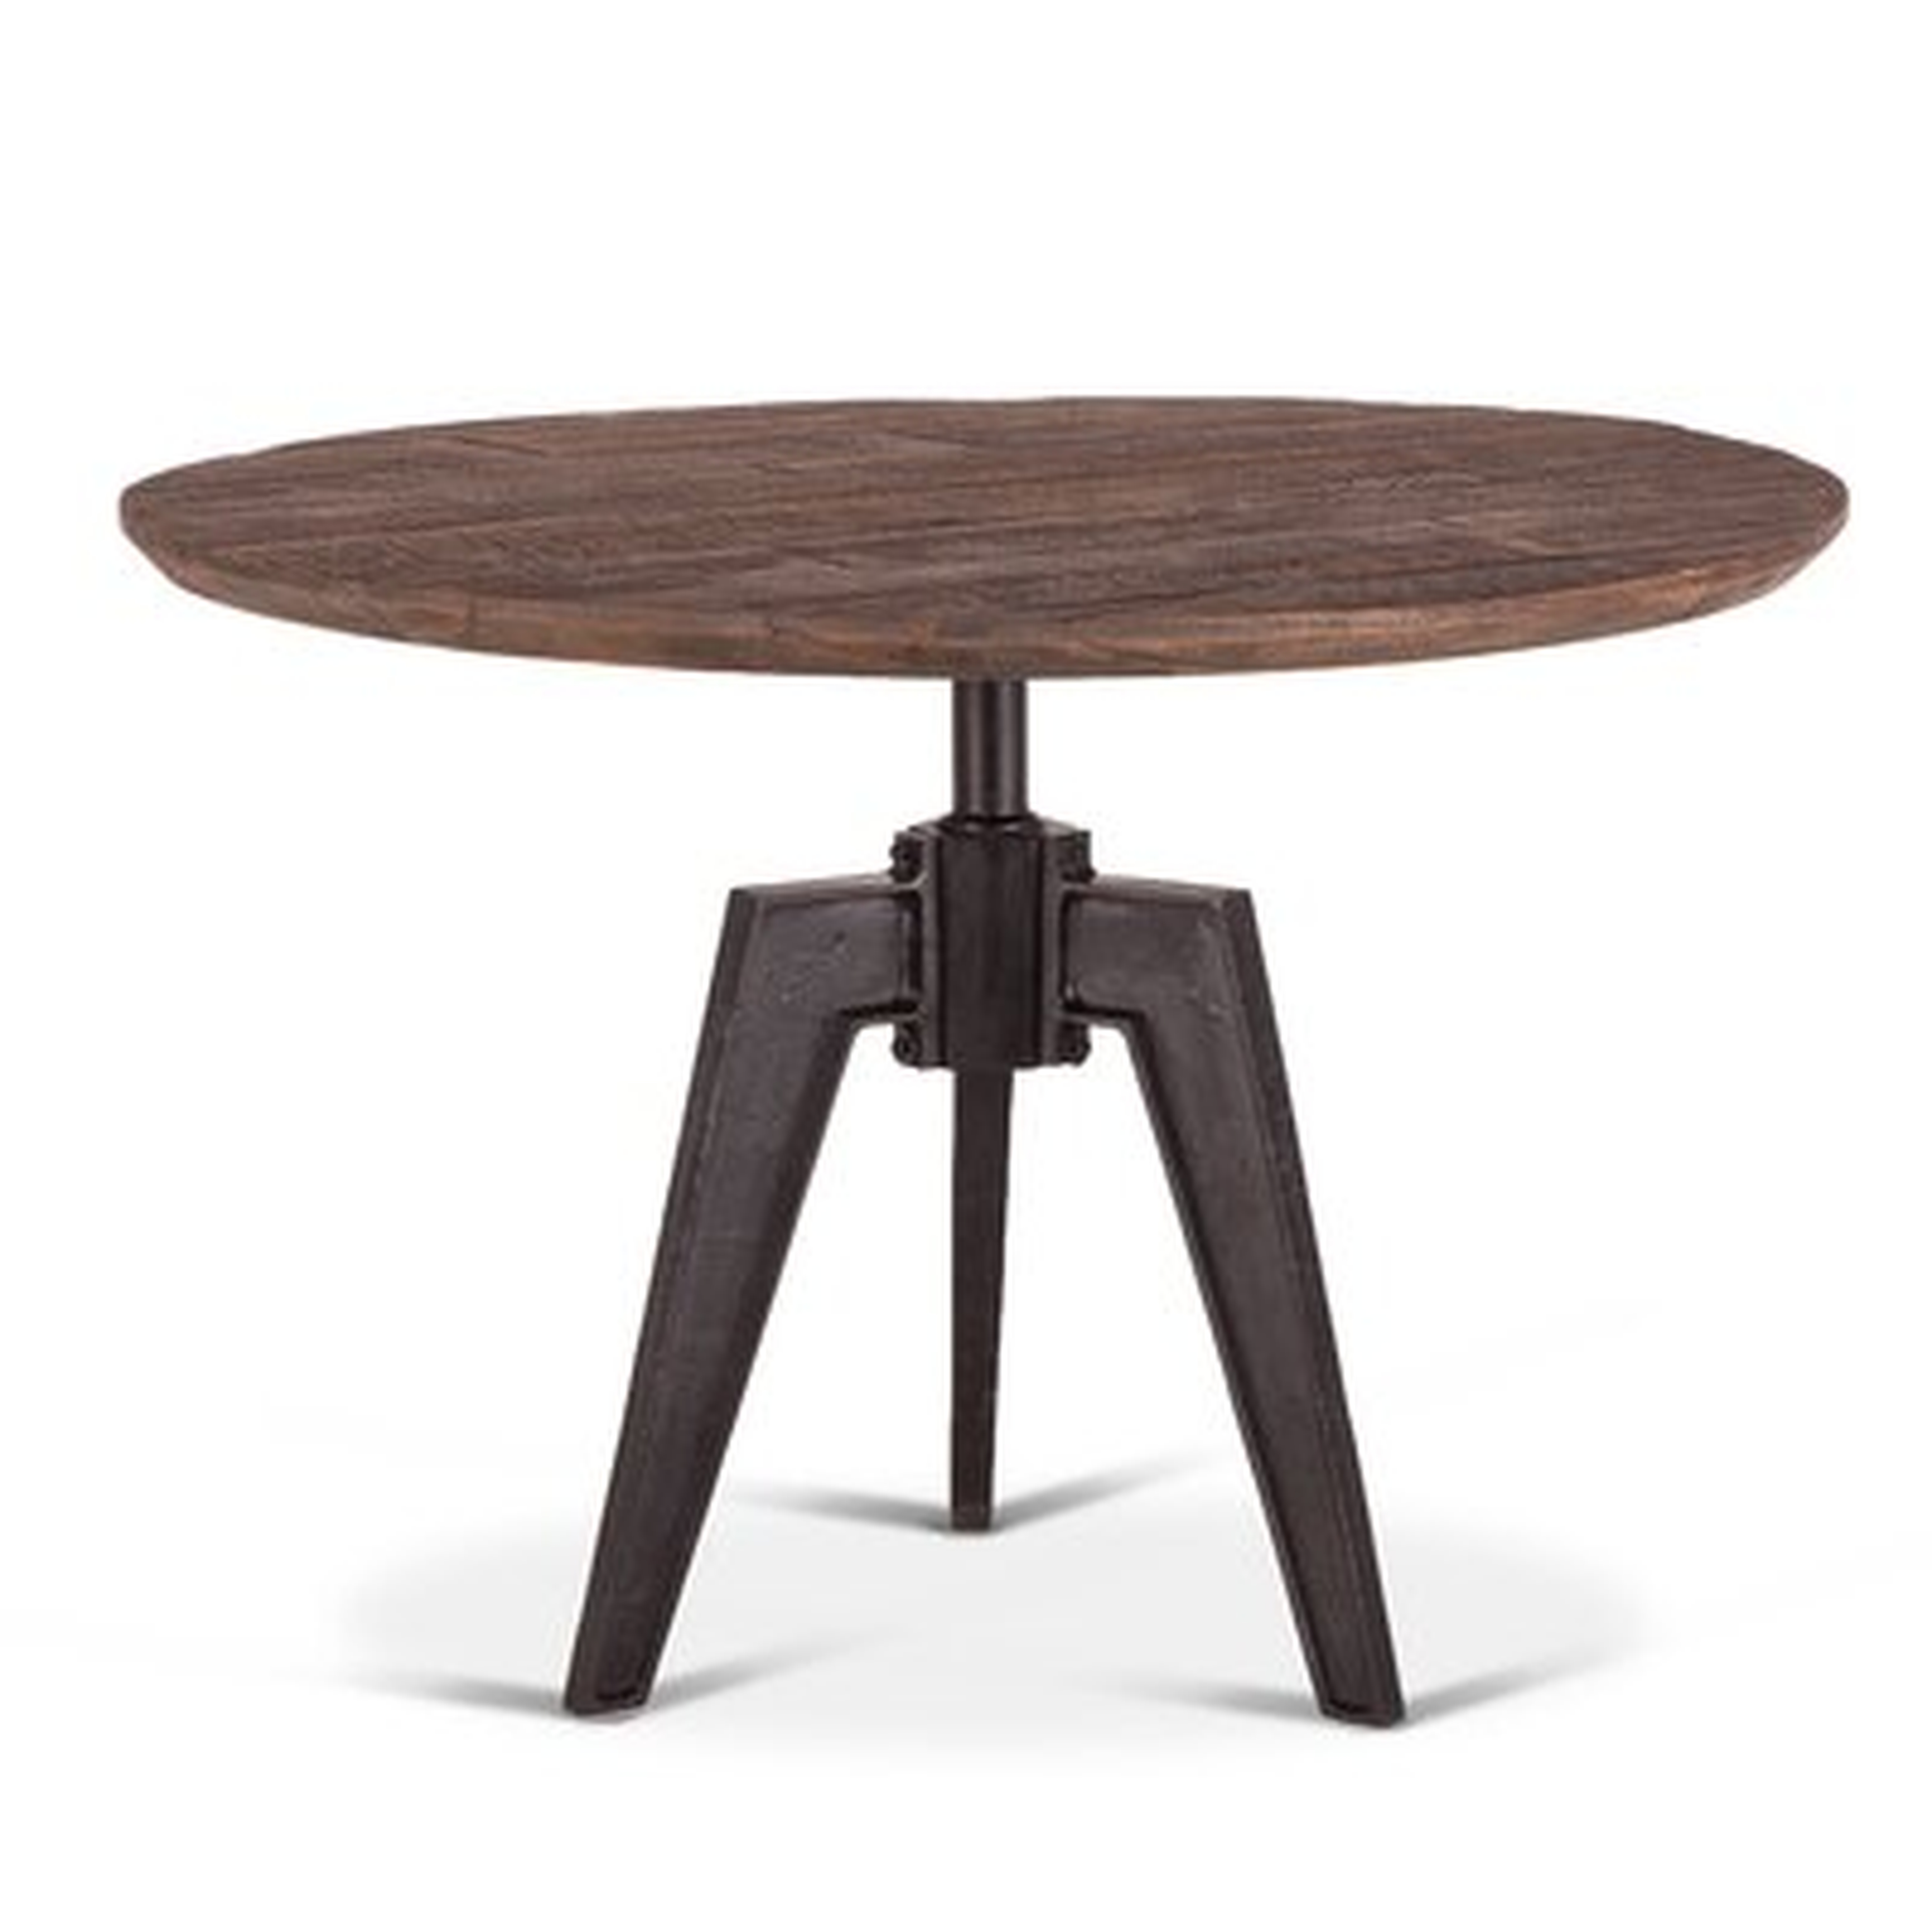 Naquin Round Dining Table - Wayfair